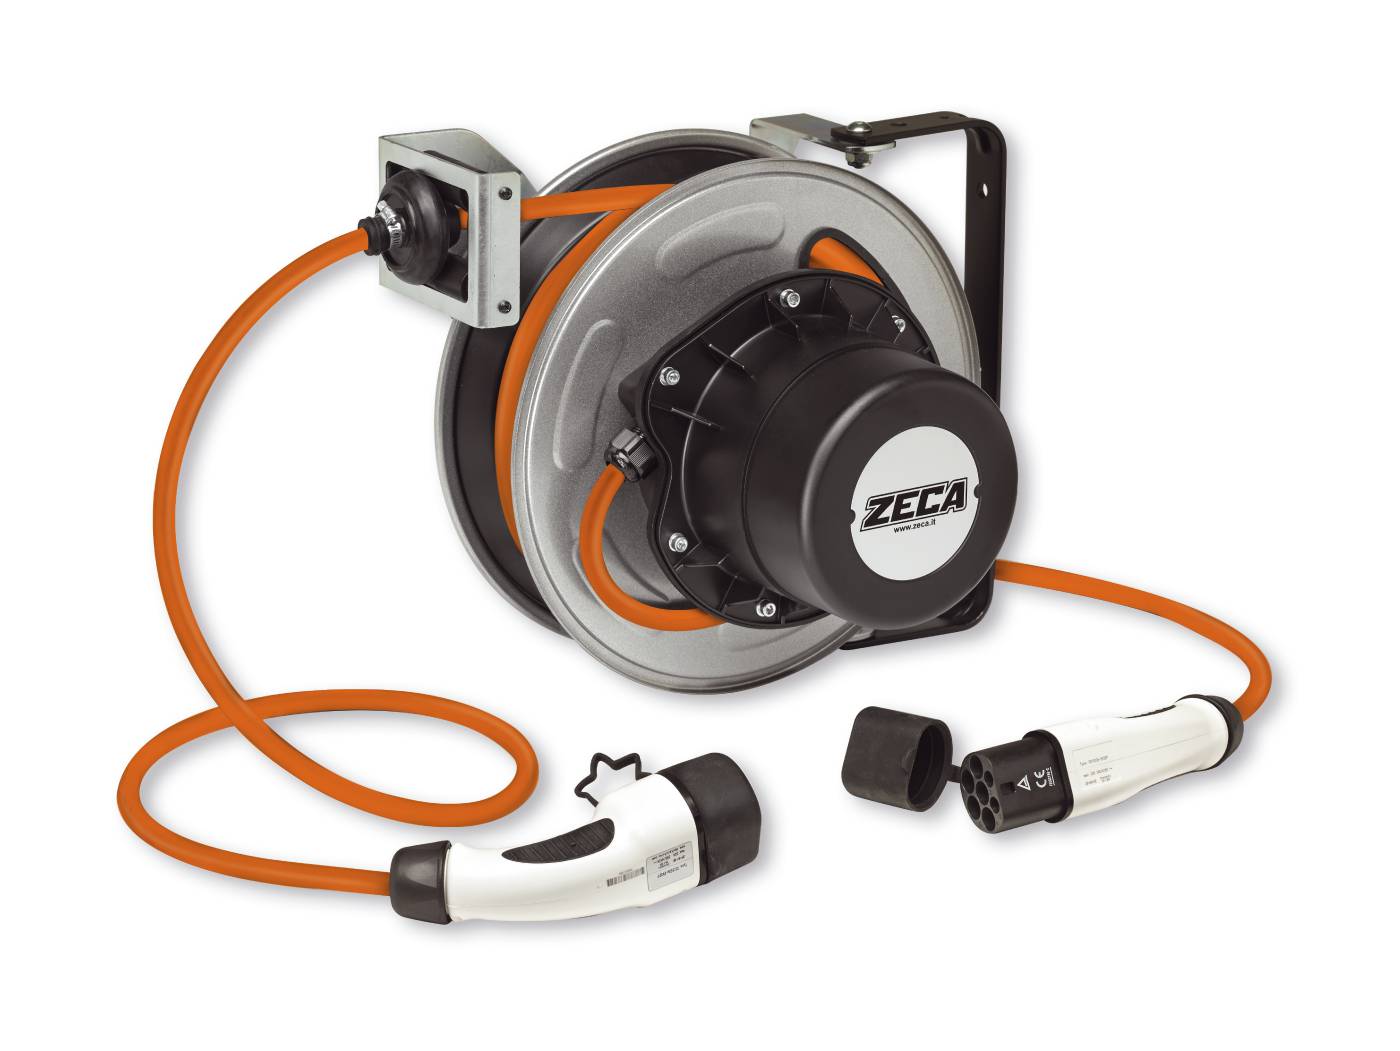 Cable reel for electric vehicle charging Zeca Toolstore by Luna Group